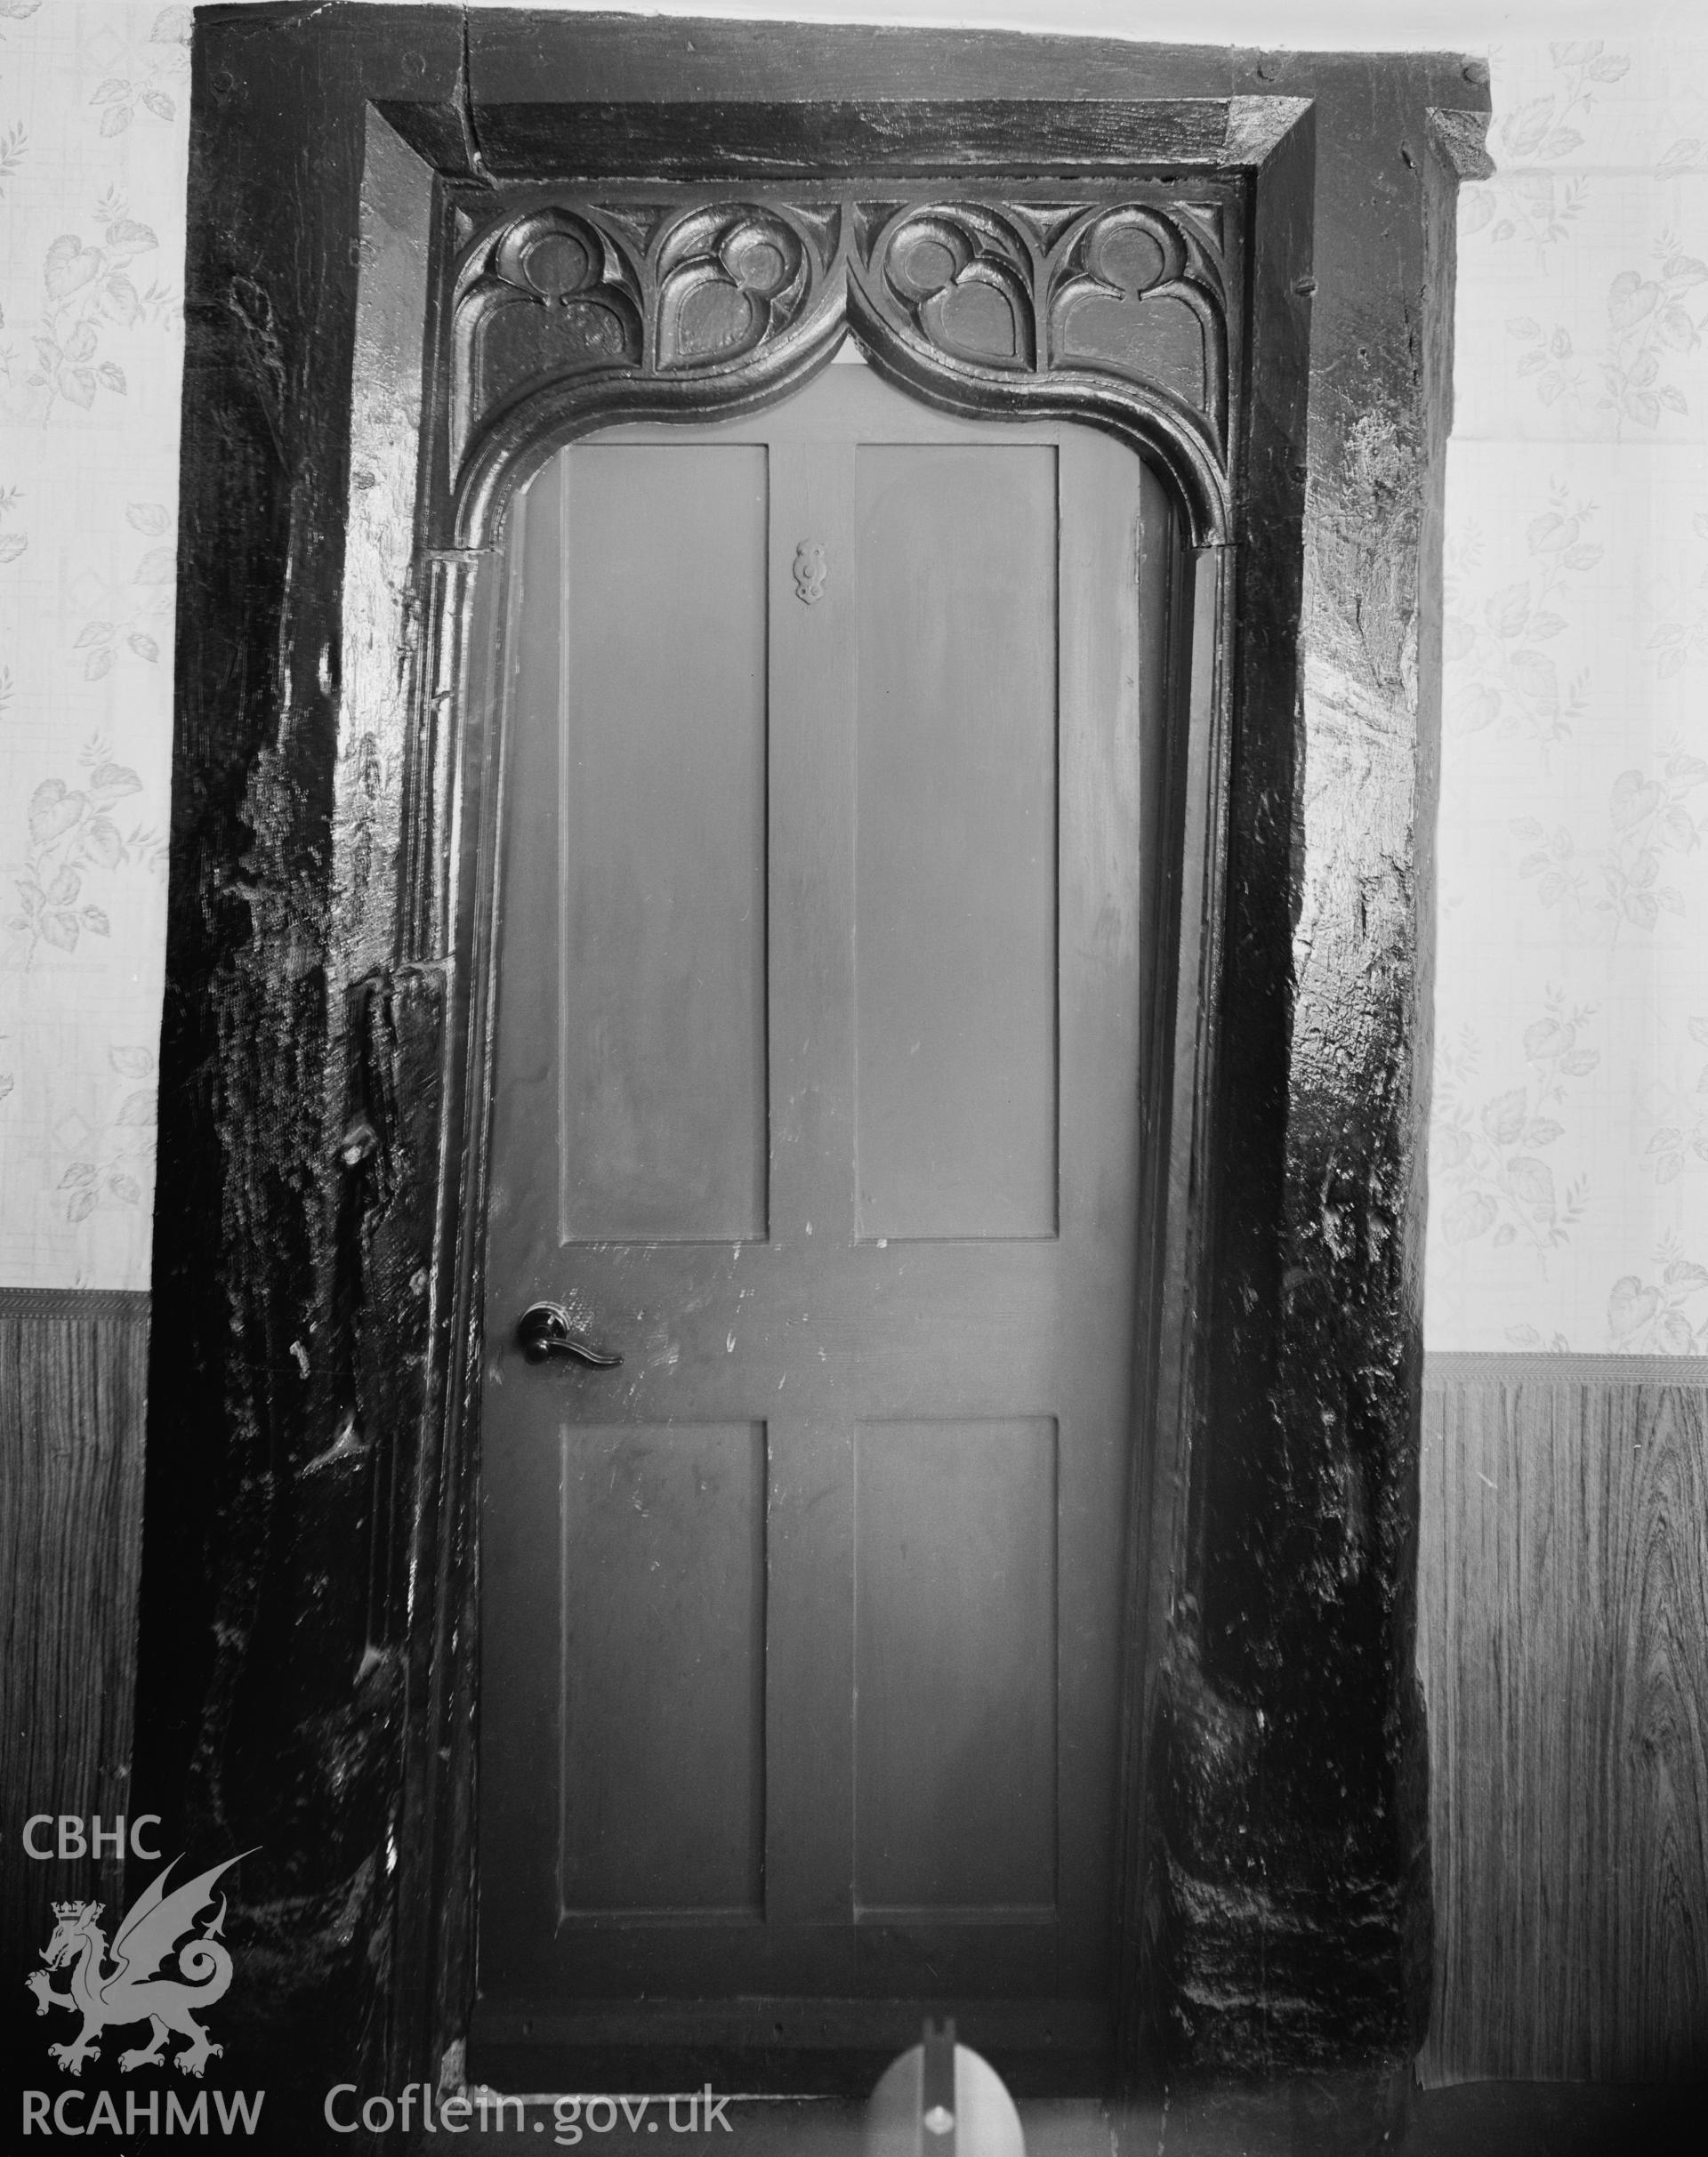 Farmhouse, interior view showing doorway in passage partition